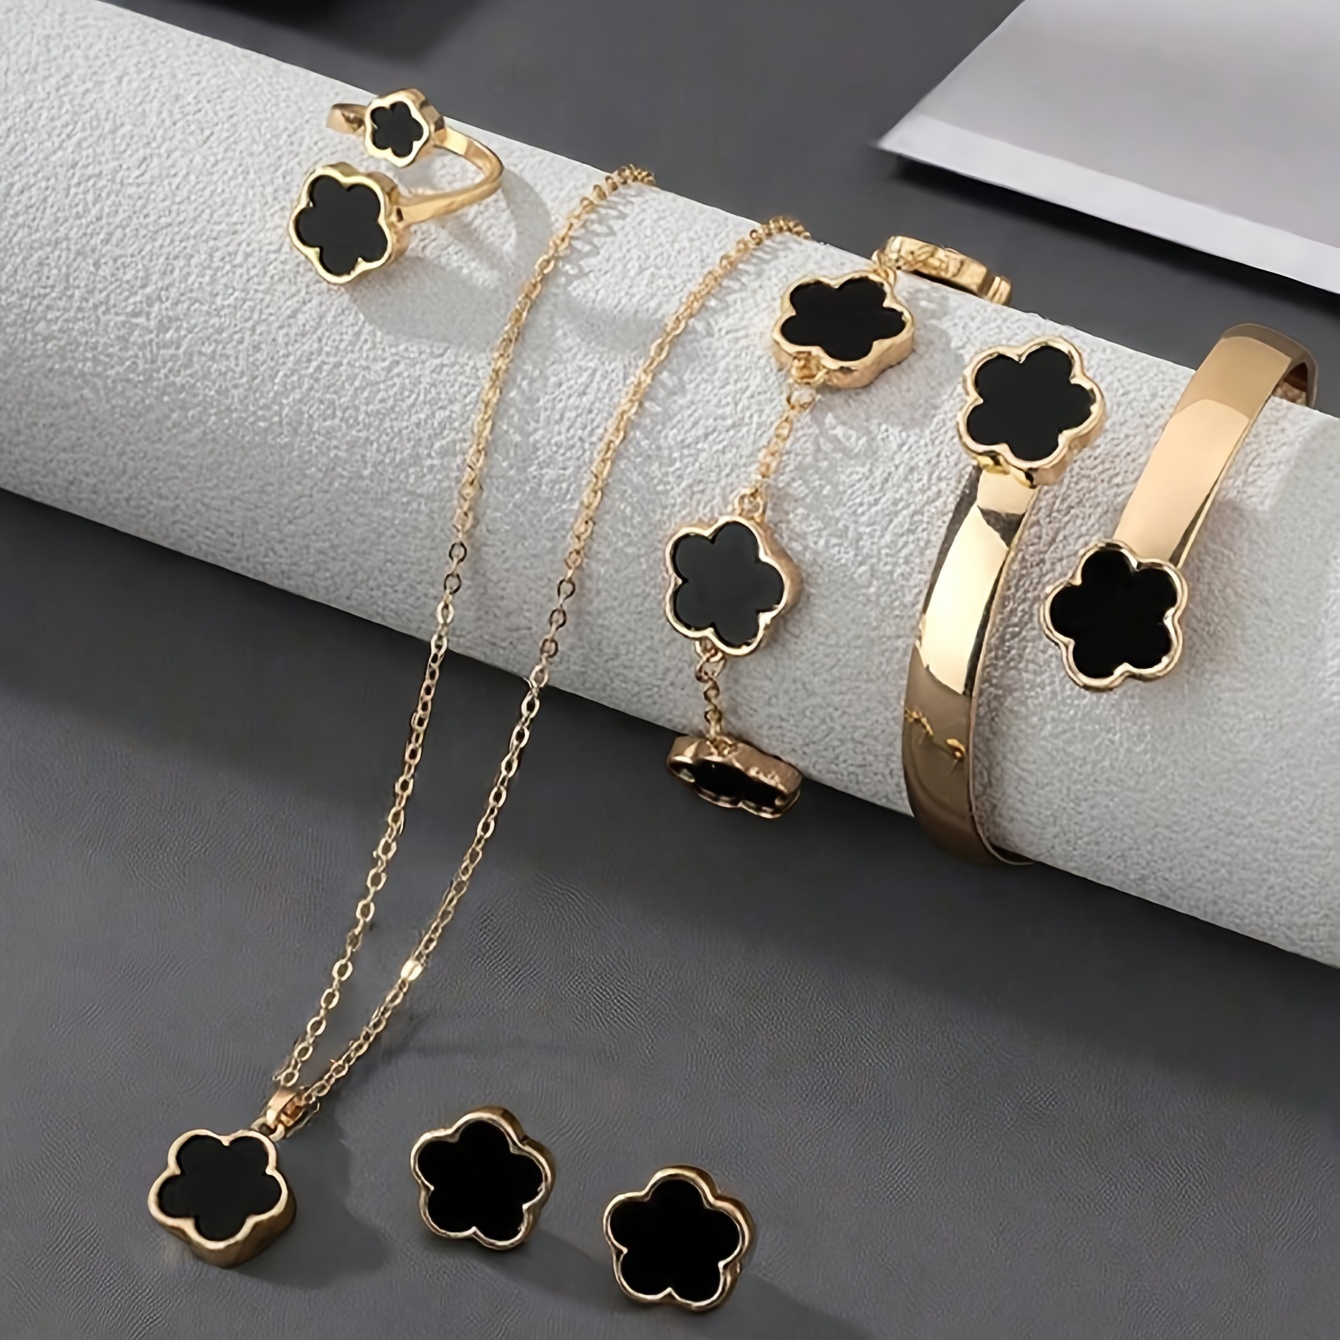 

6pcs/set, Lucky 4 Leaf Clover Jewelry Set - Includes Bracelet, Necklace, Earrings, Ring, Bangle - Vintage Style, Vacation-inspired Golden Tone Accessories For Women